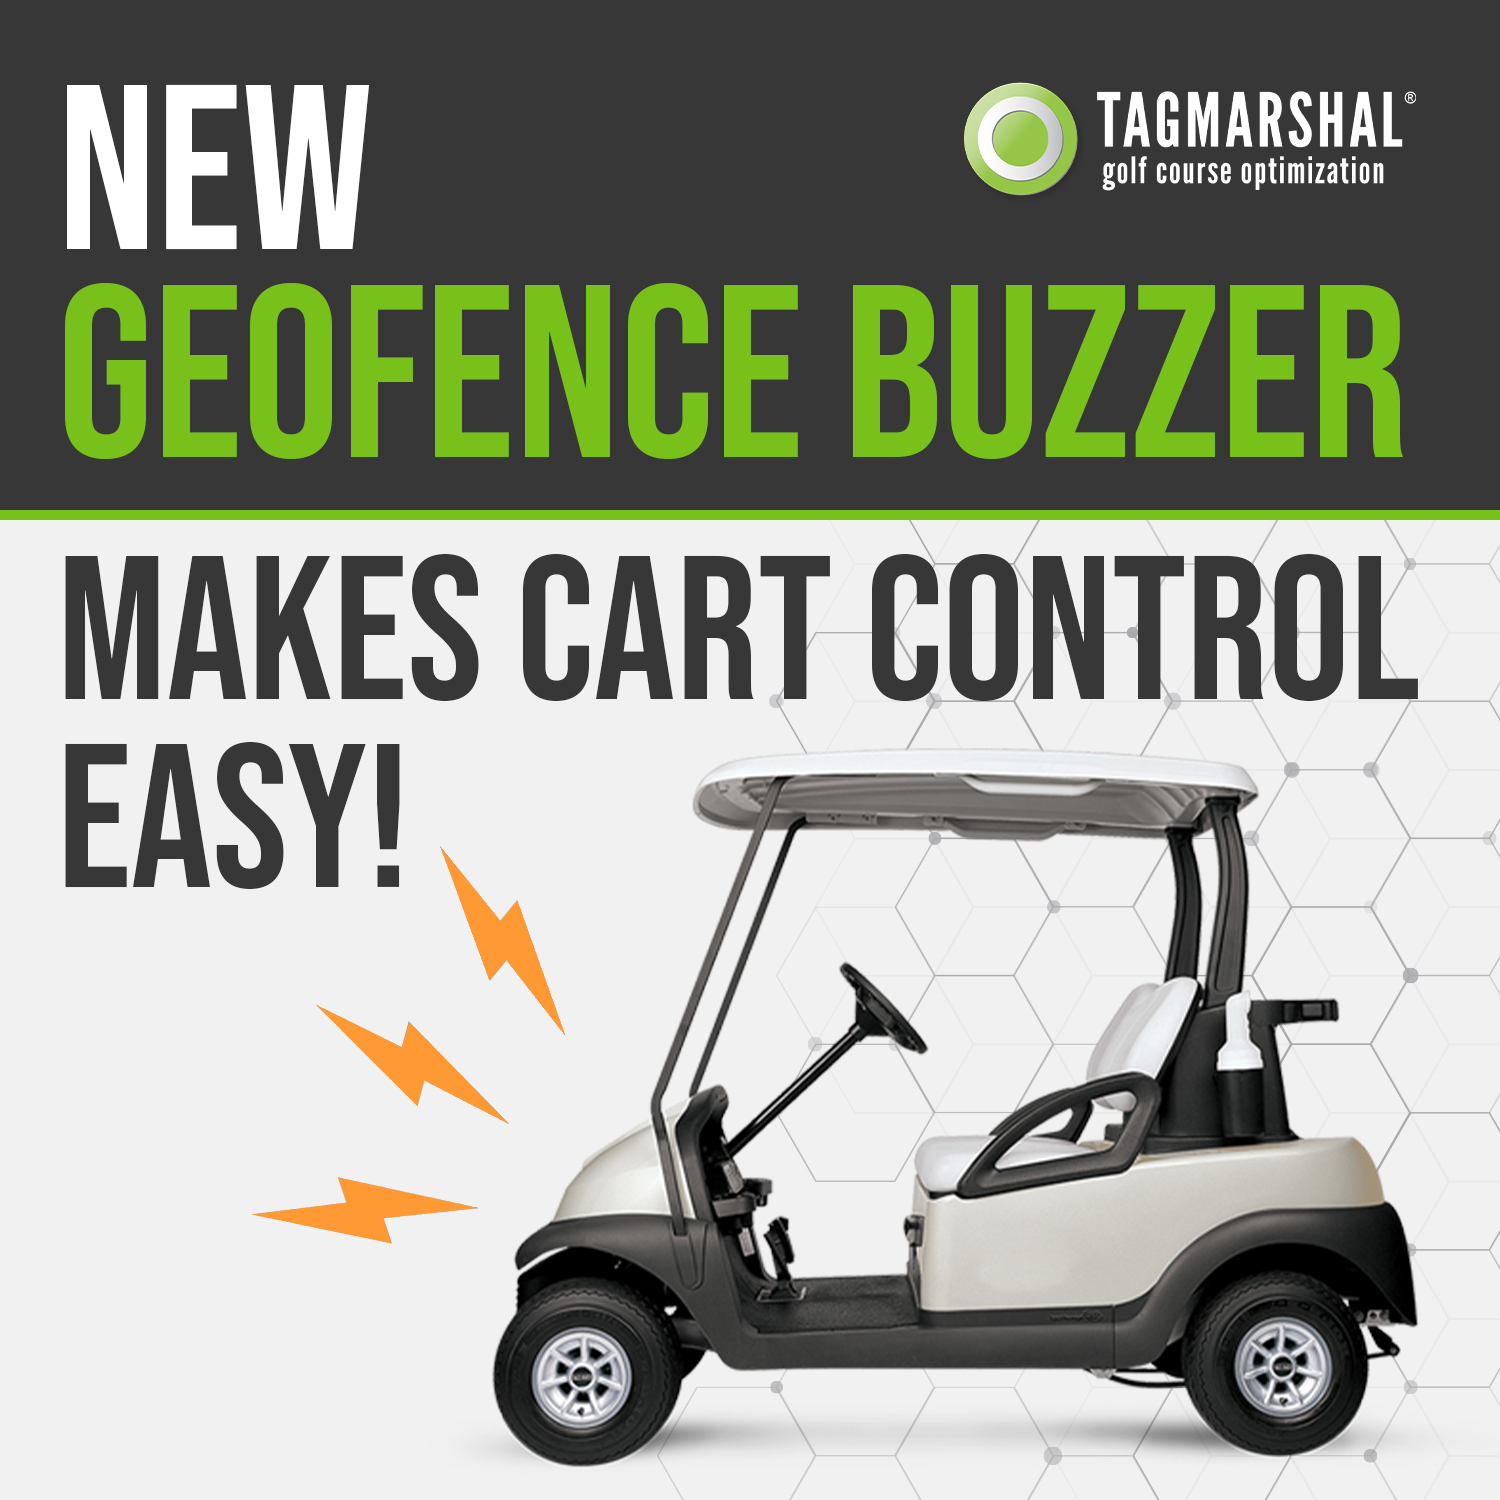 Tagmarshal Launches “Geofence Buzzer” Solution to Actively Manage Cart Tracking and Geofencing Compliance